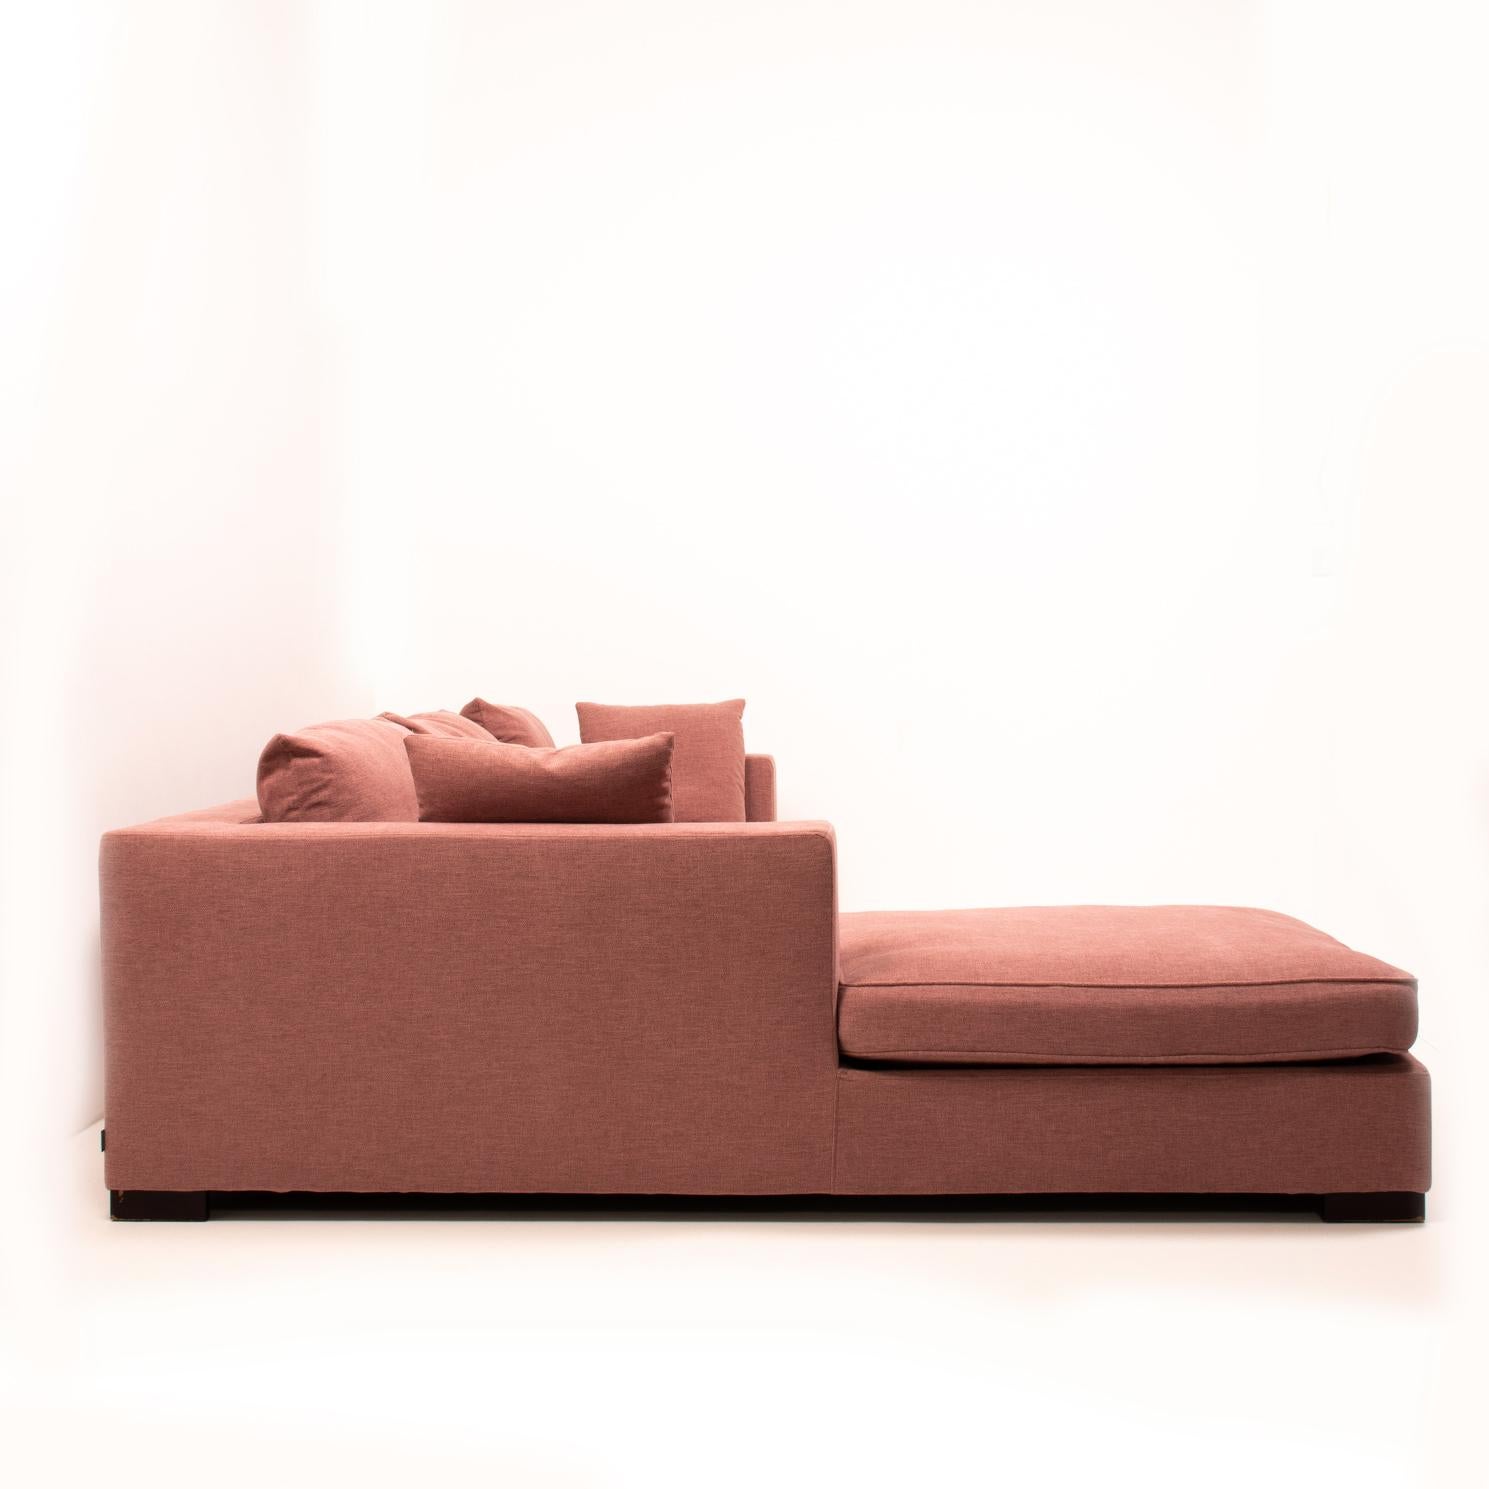 Classic and elegant, this Rive Gauche corner sofa was designed by Didier Gomez for Ligne Roset.

Comprising of two separate pieces, the sofa has a steel frame with ebony-stained oak feet, and has been newly reupholstered in soft dusty pink